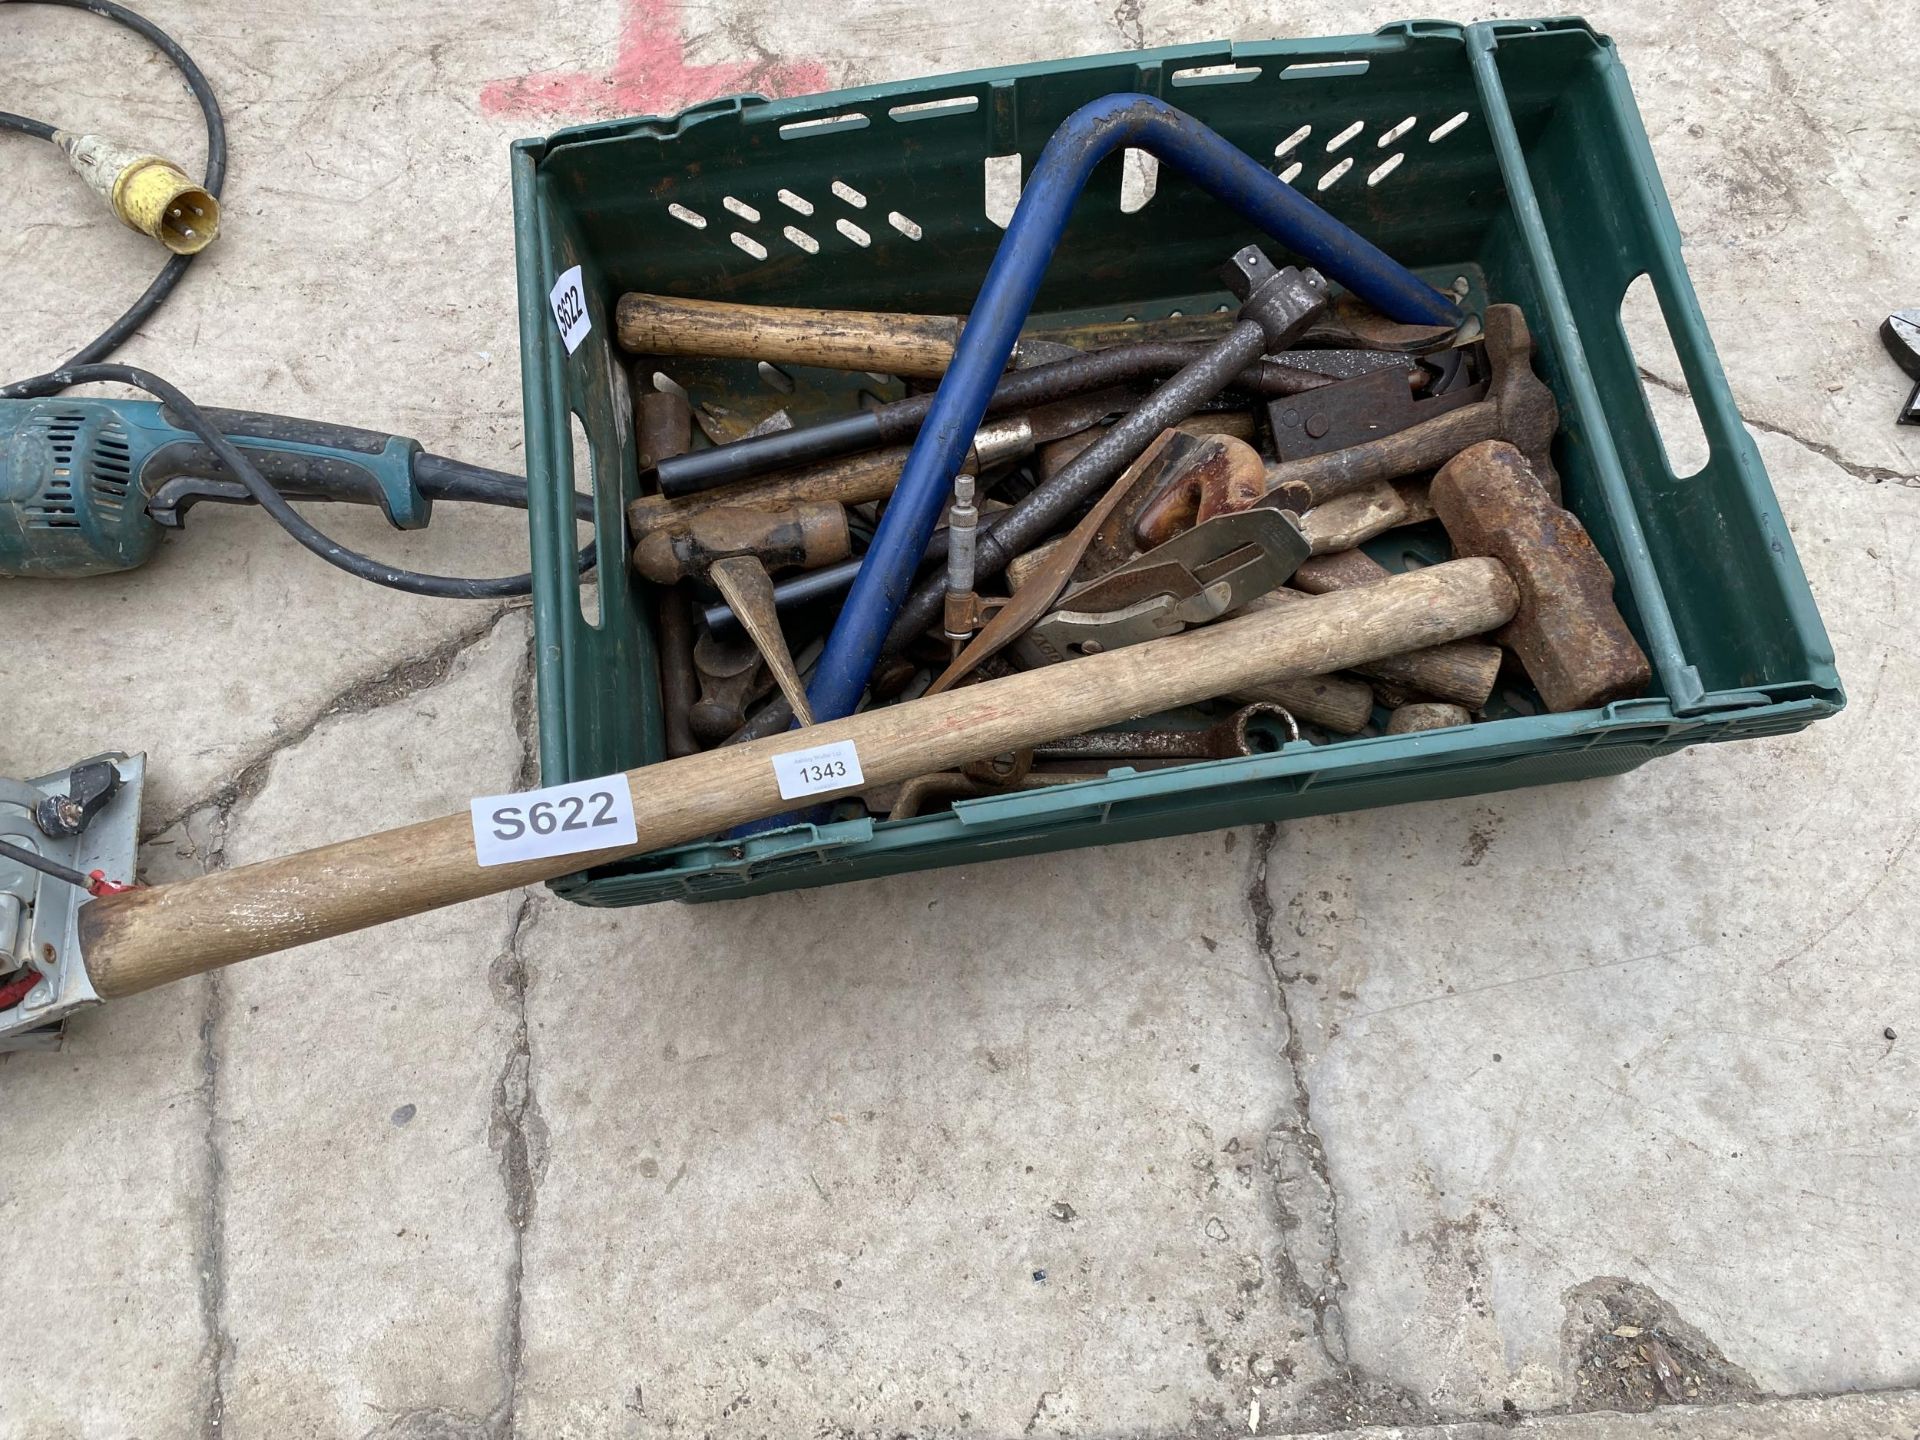 AN ASSORTMENT OF TOOLS TO INCLUDE A WOOD PLANE, A SLEDGE HAMMER AND SHEARS ETC